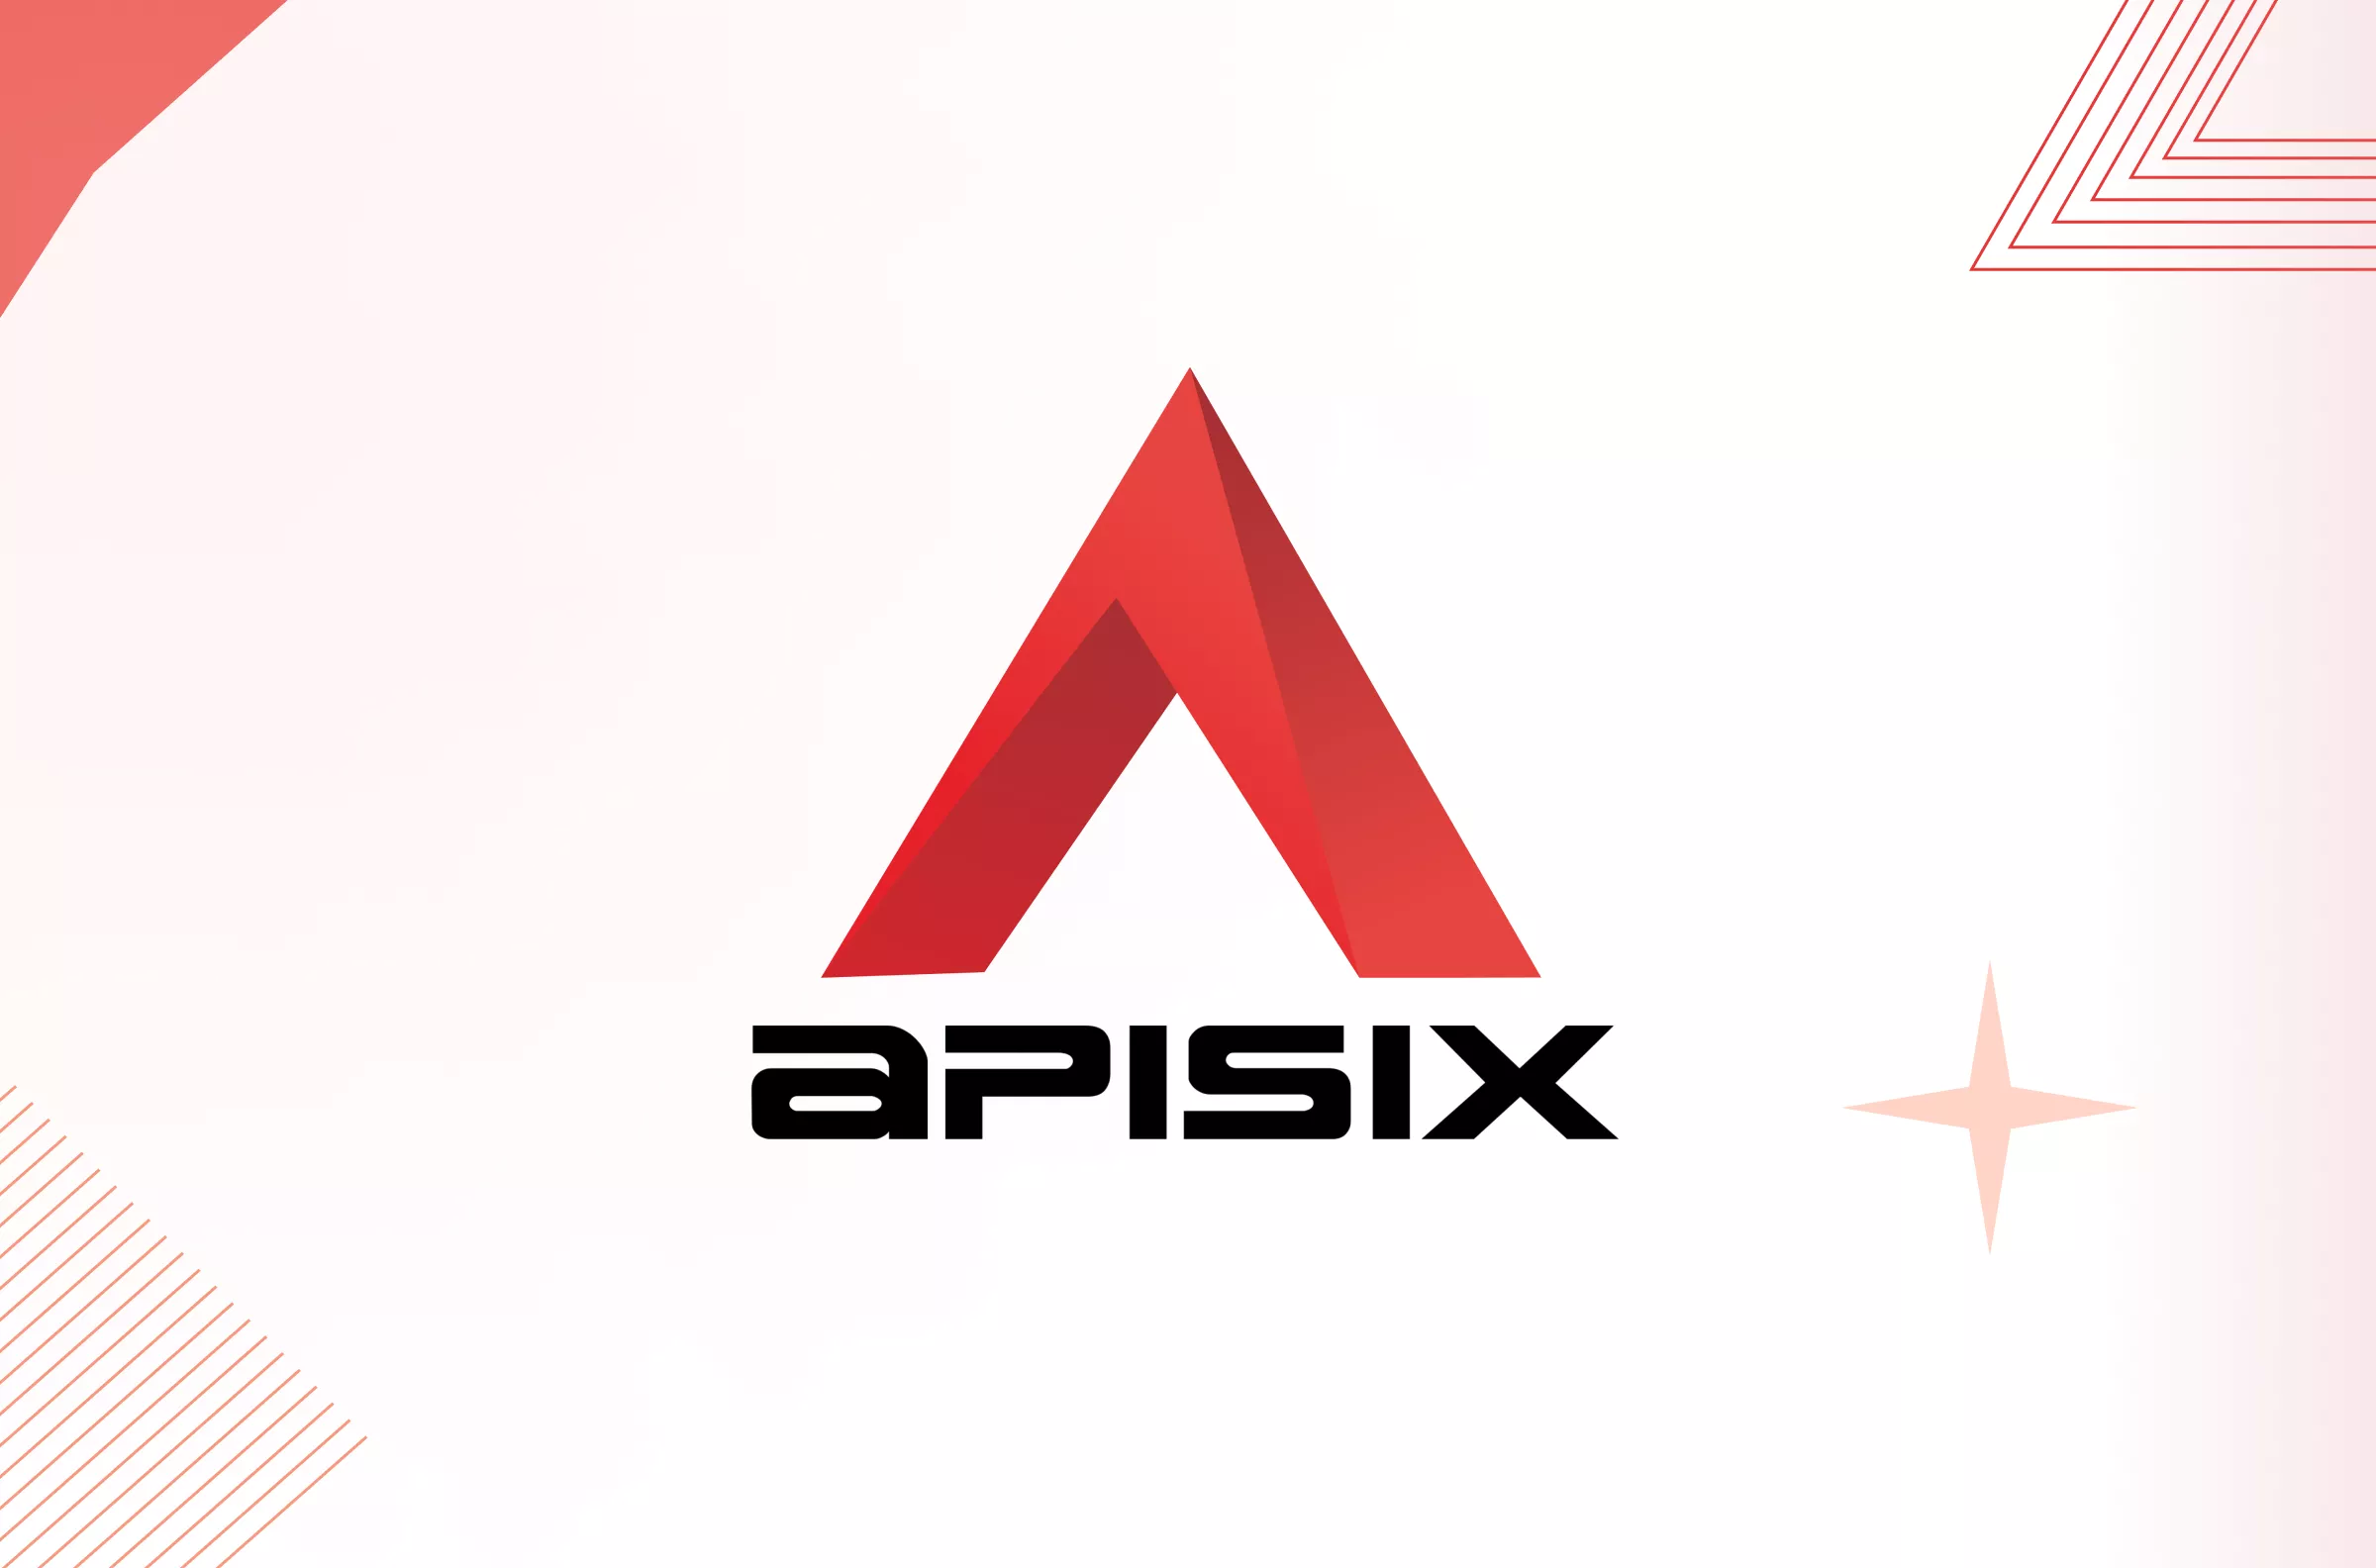 Why Would You Choose Apache APISIX Instead of NGINX or Kong